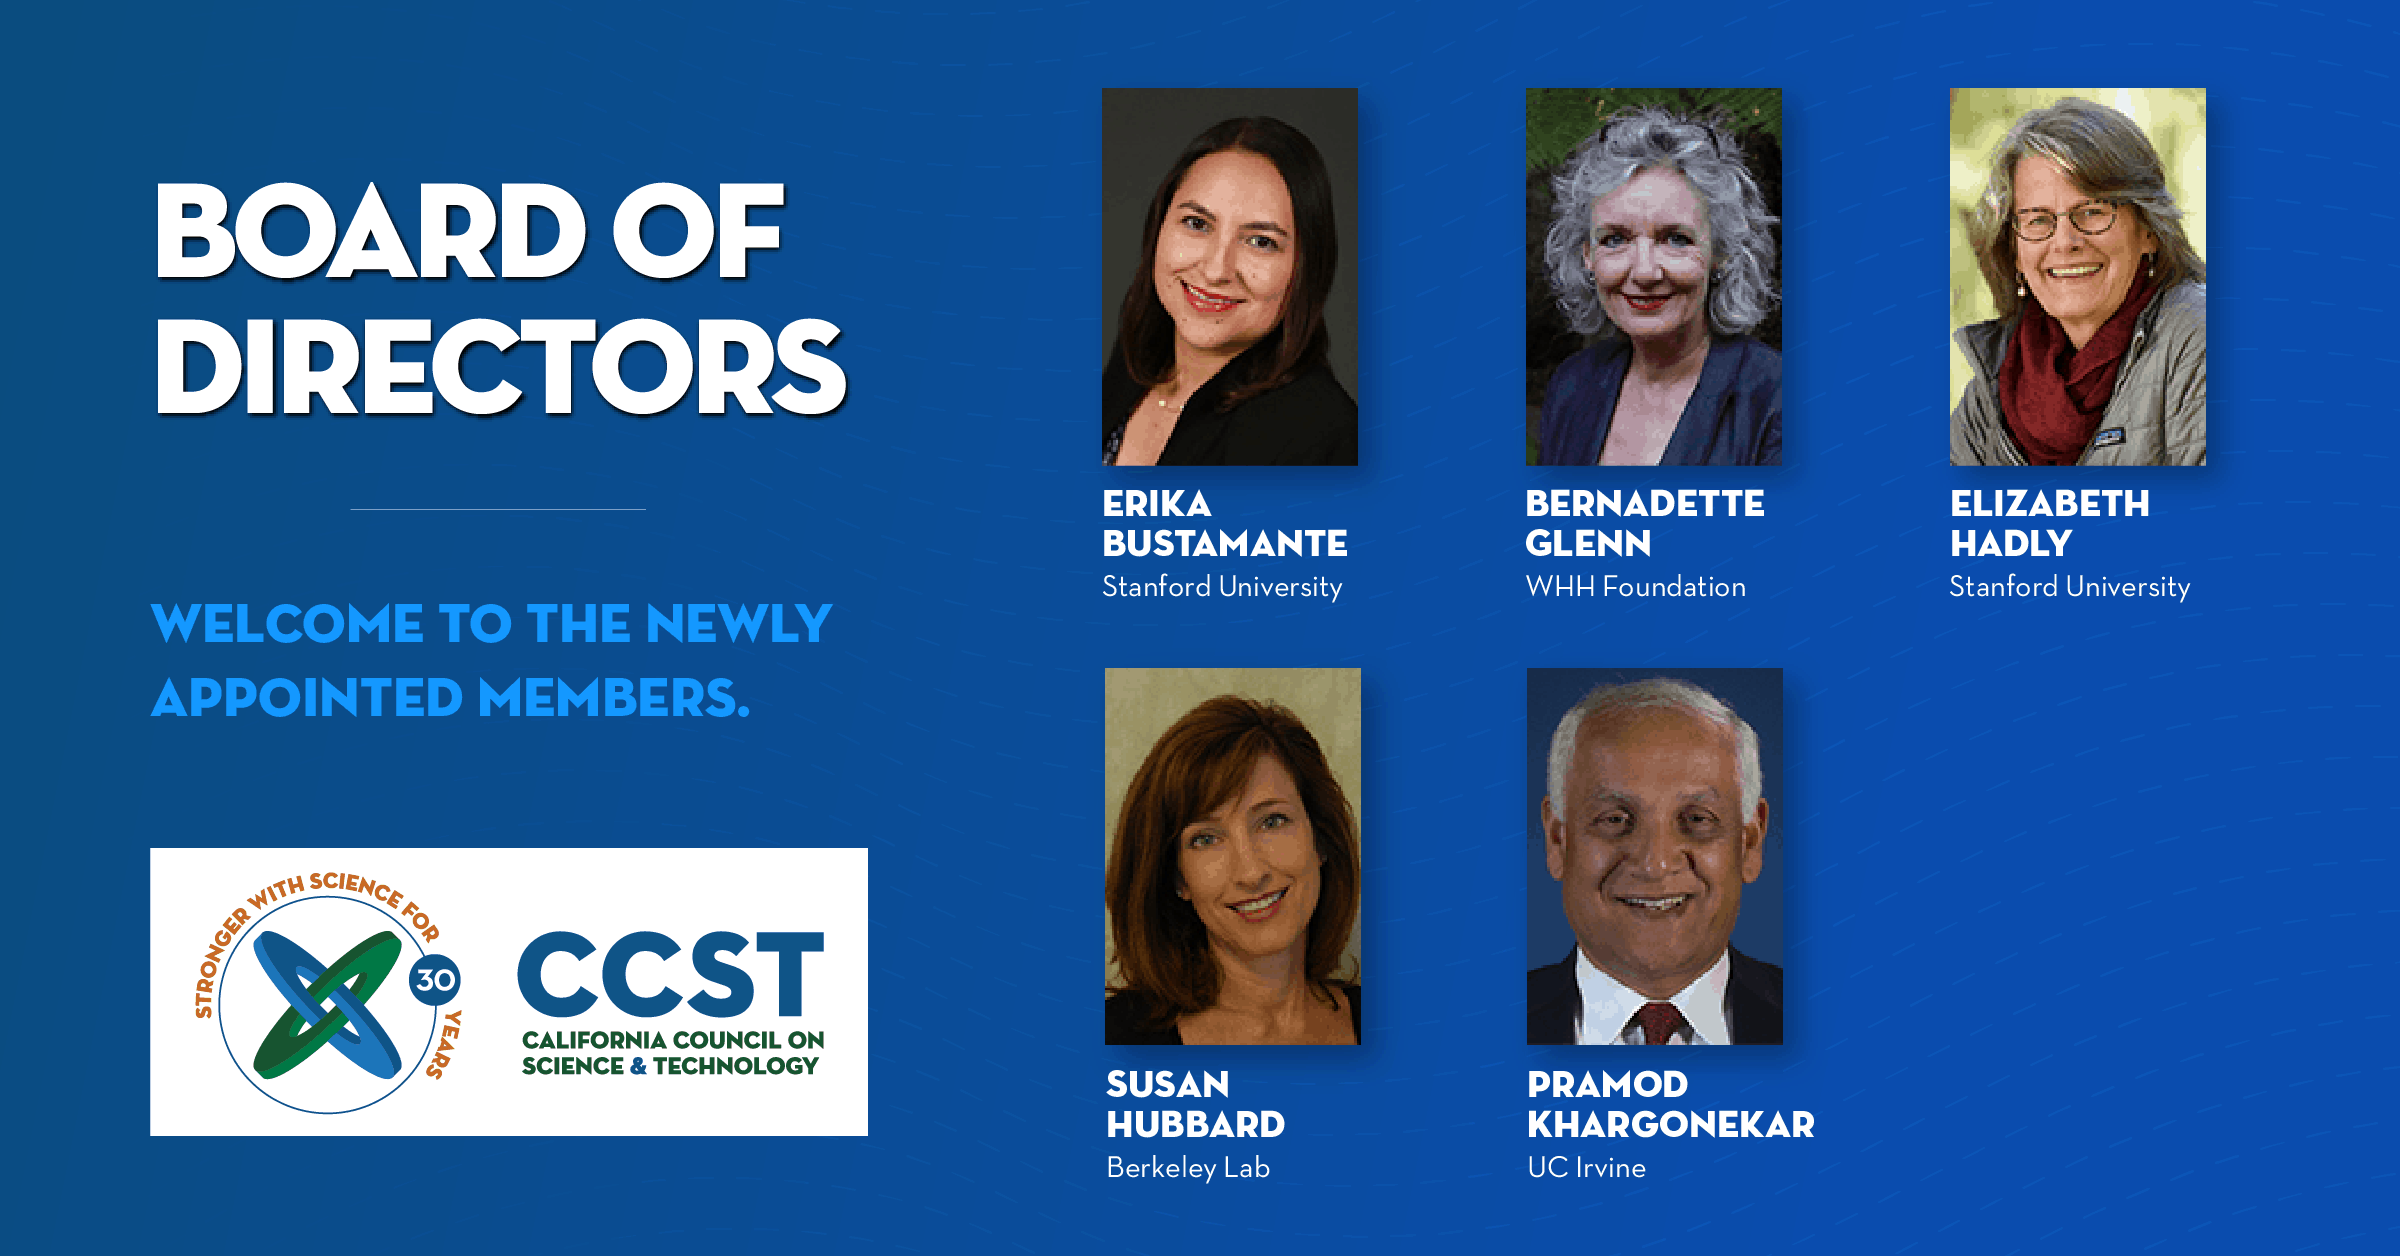 Photos of the new Board members with a welcome message on a blue background